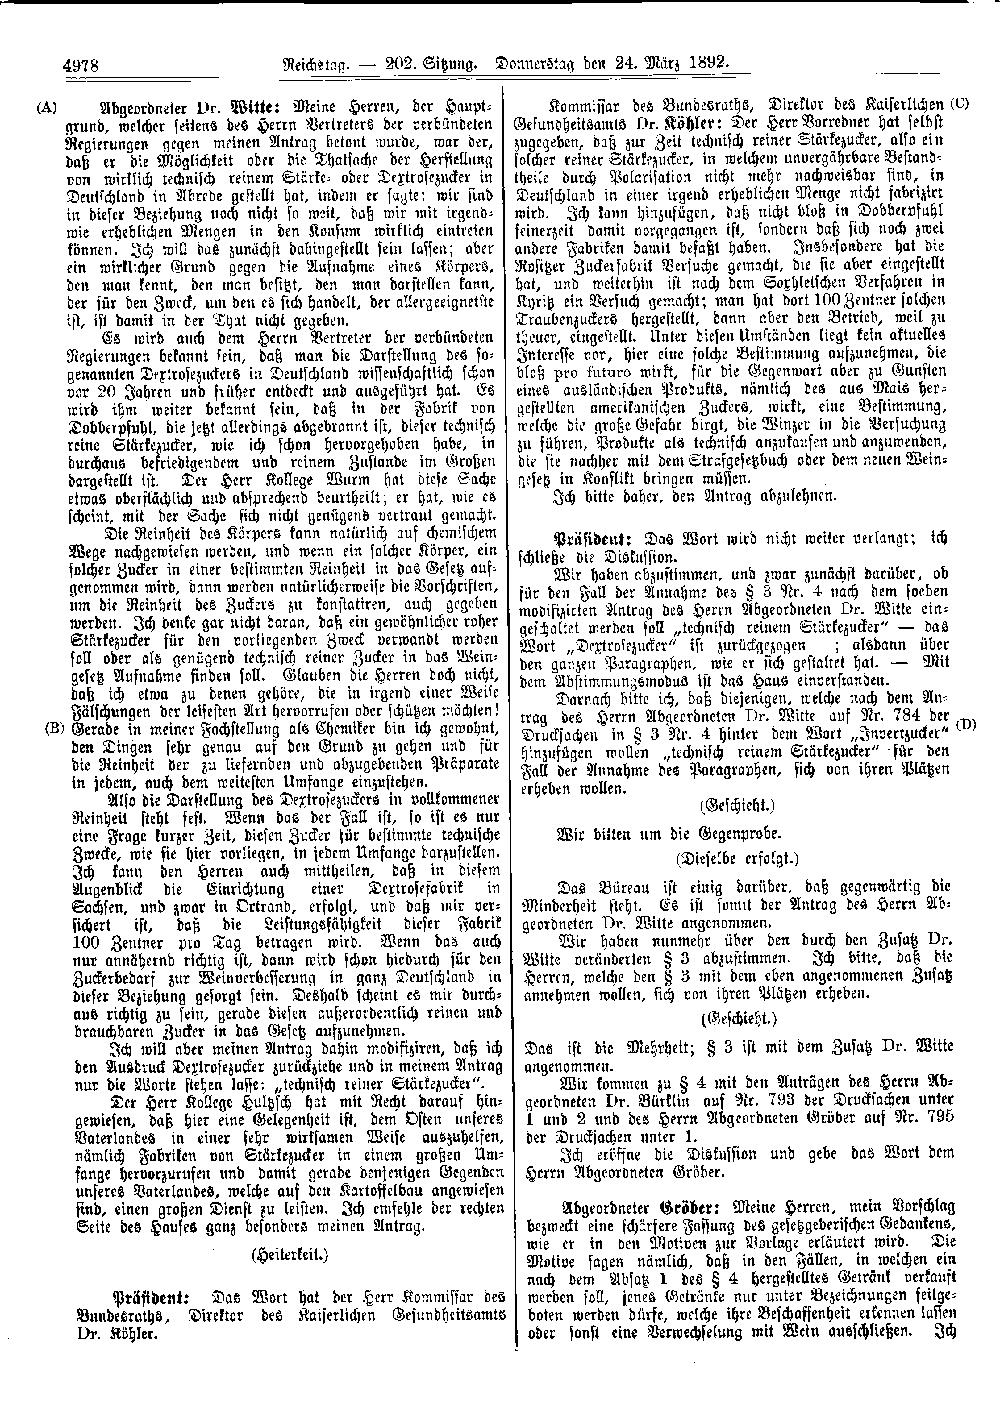 Scan of page 4978